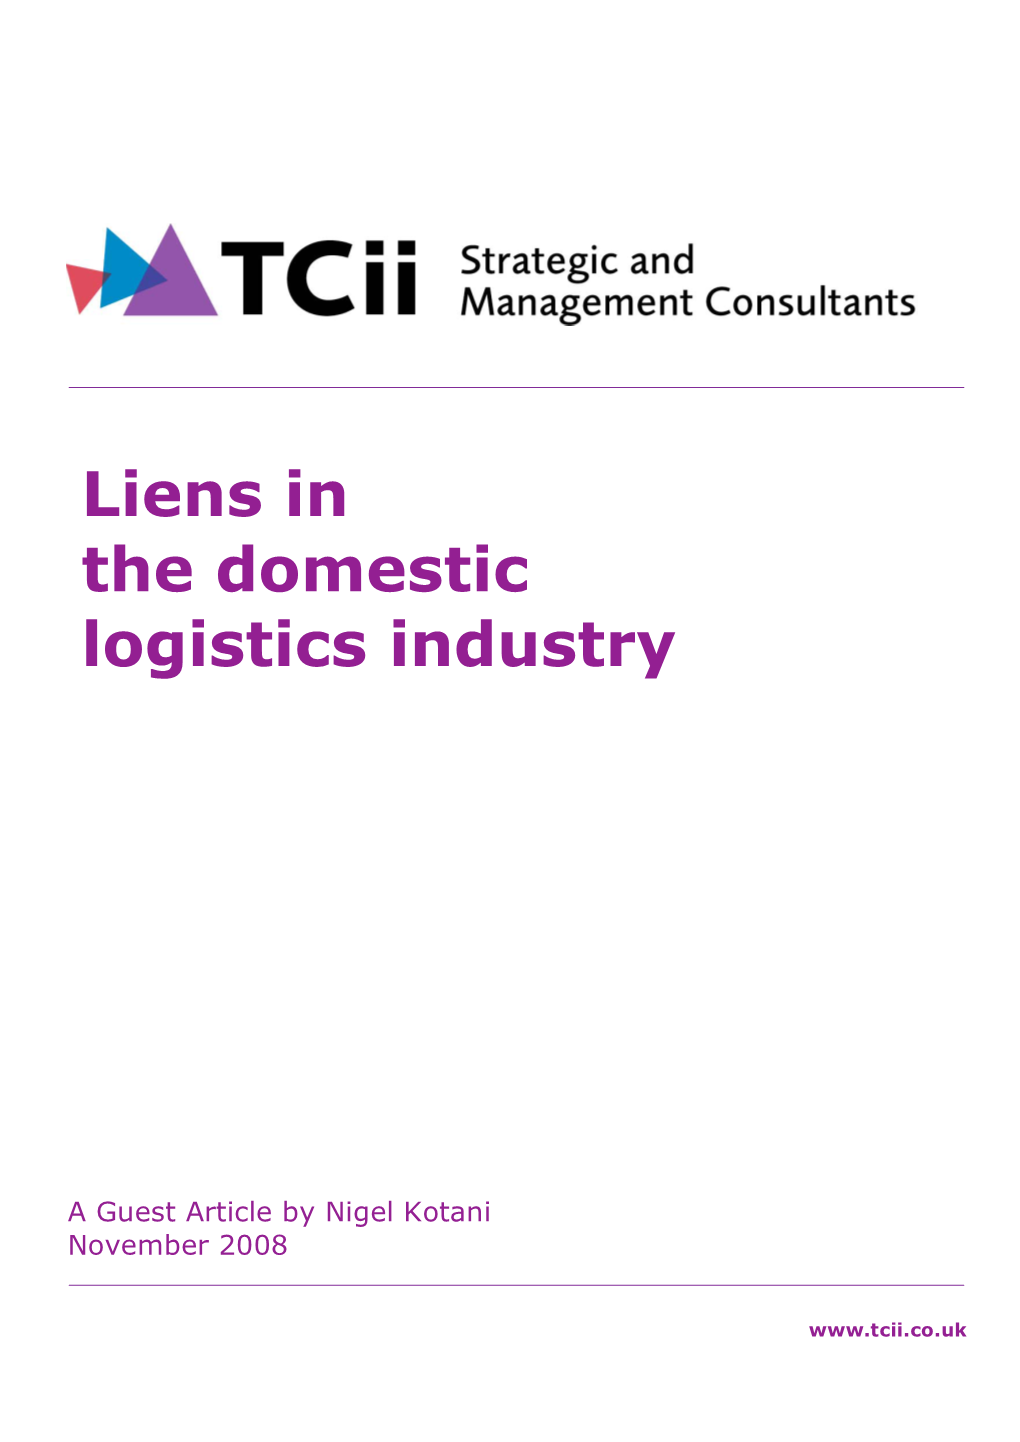 Liens in the Domestic Logistics Industry